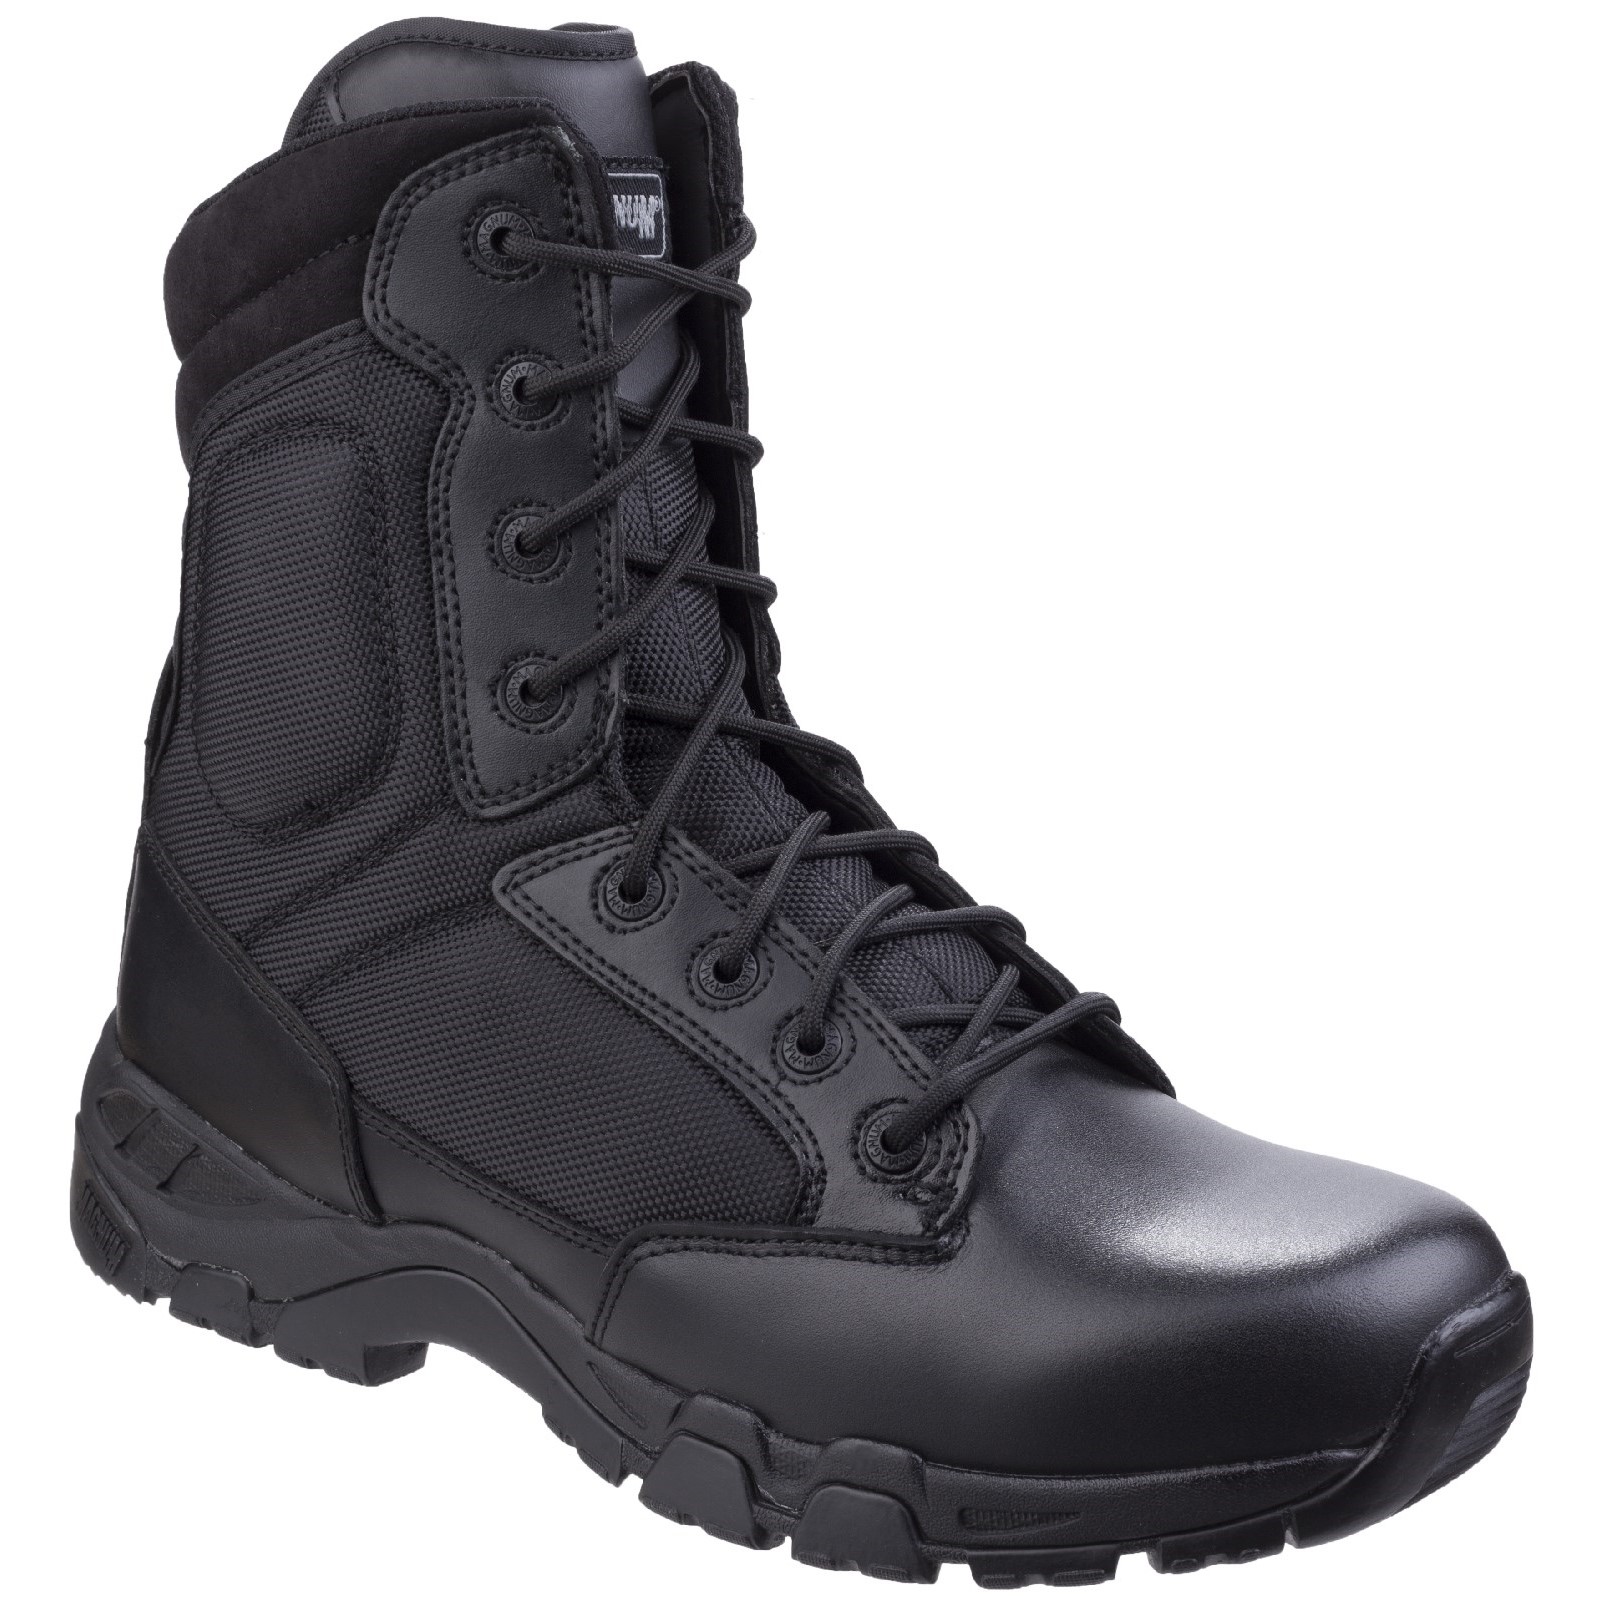 Viper Pro 8.0 EN Lace Up Safety Boot